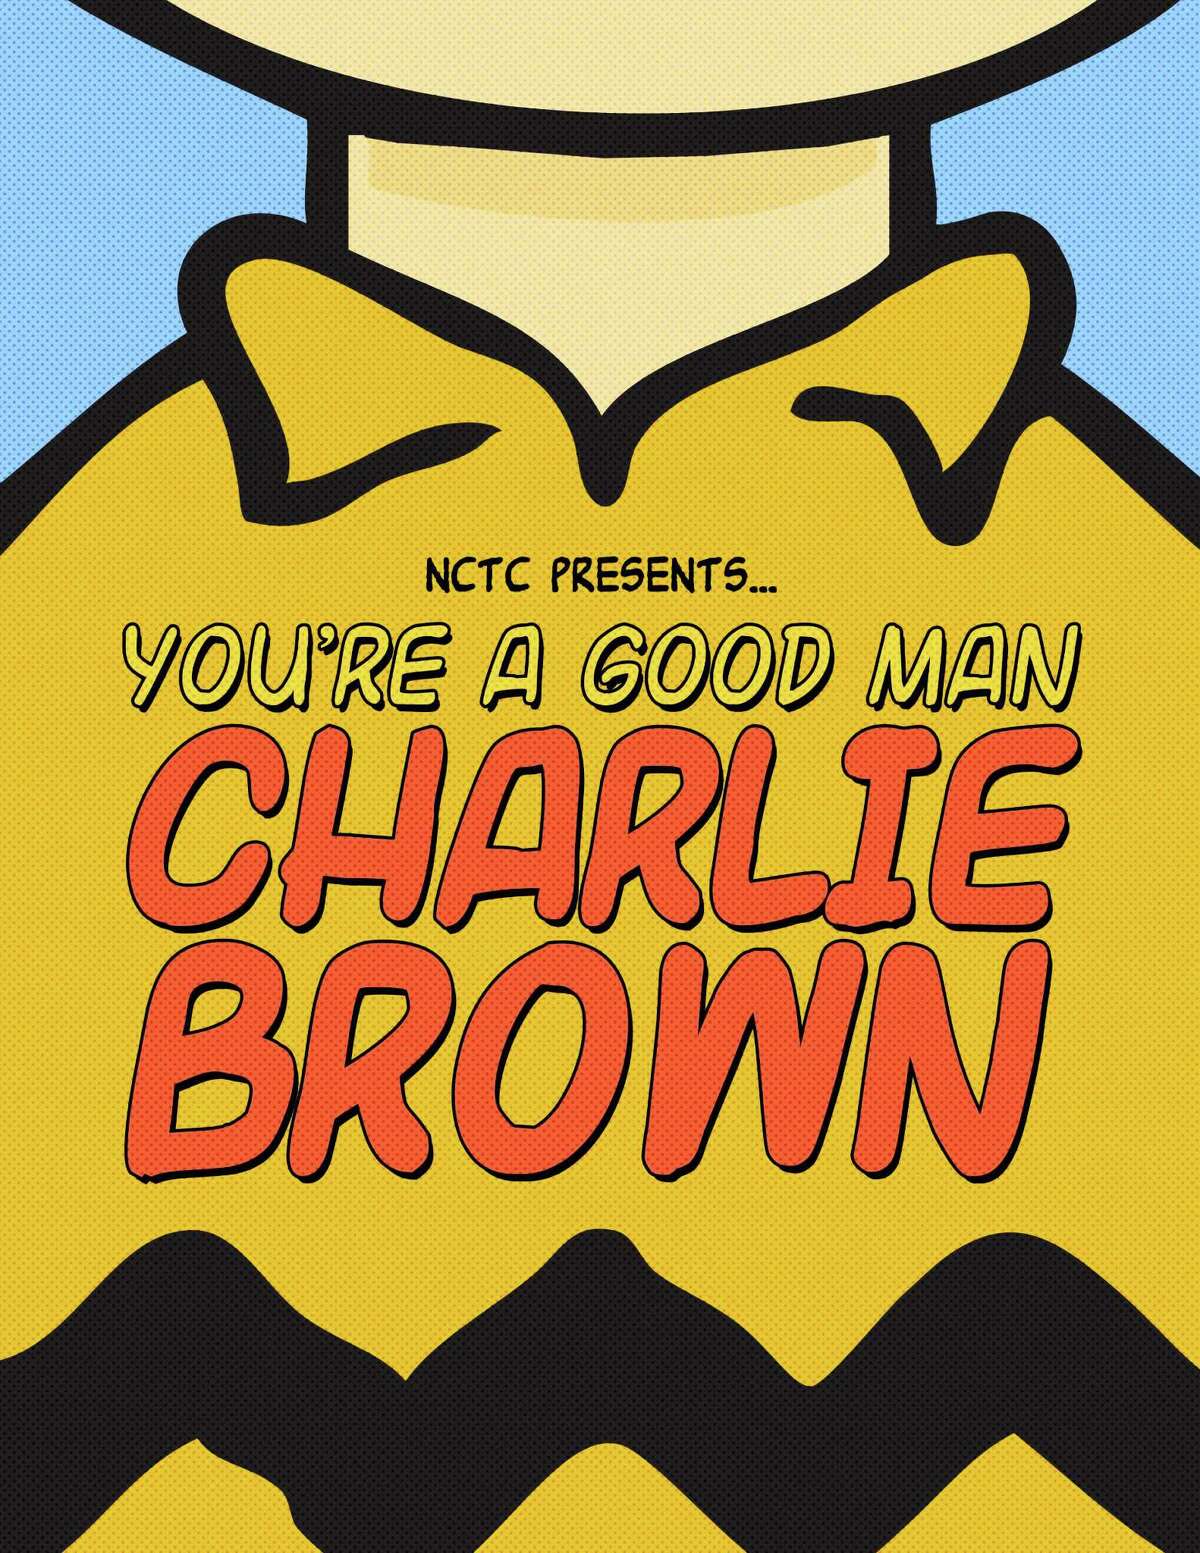 Northeast Children's Theatre Company presents "You're A Good Man, Charlie Brown" at Fairfield Theatre Company at StageOne Saturday, May 4 through Sunday, May 12.